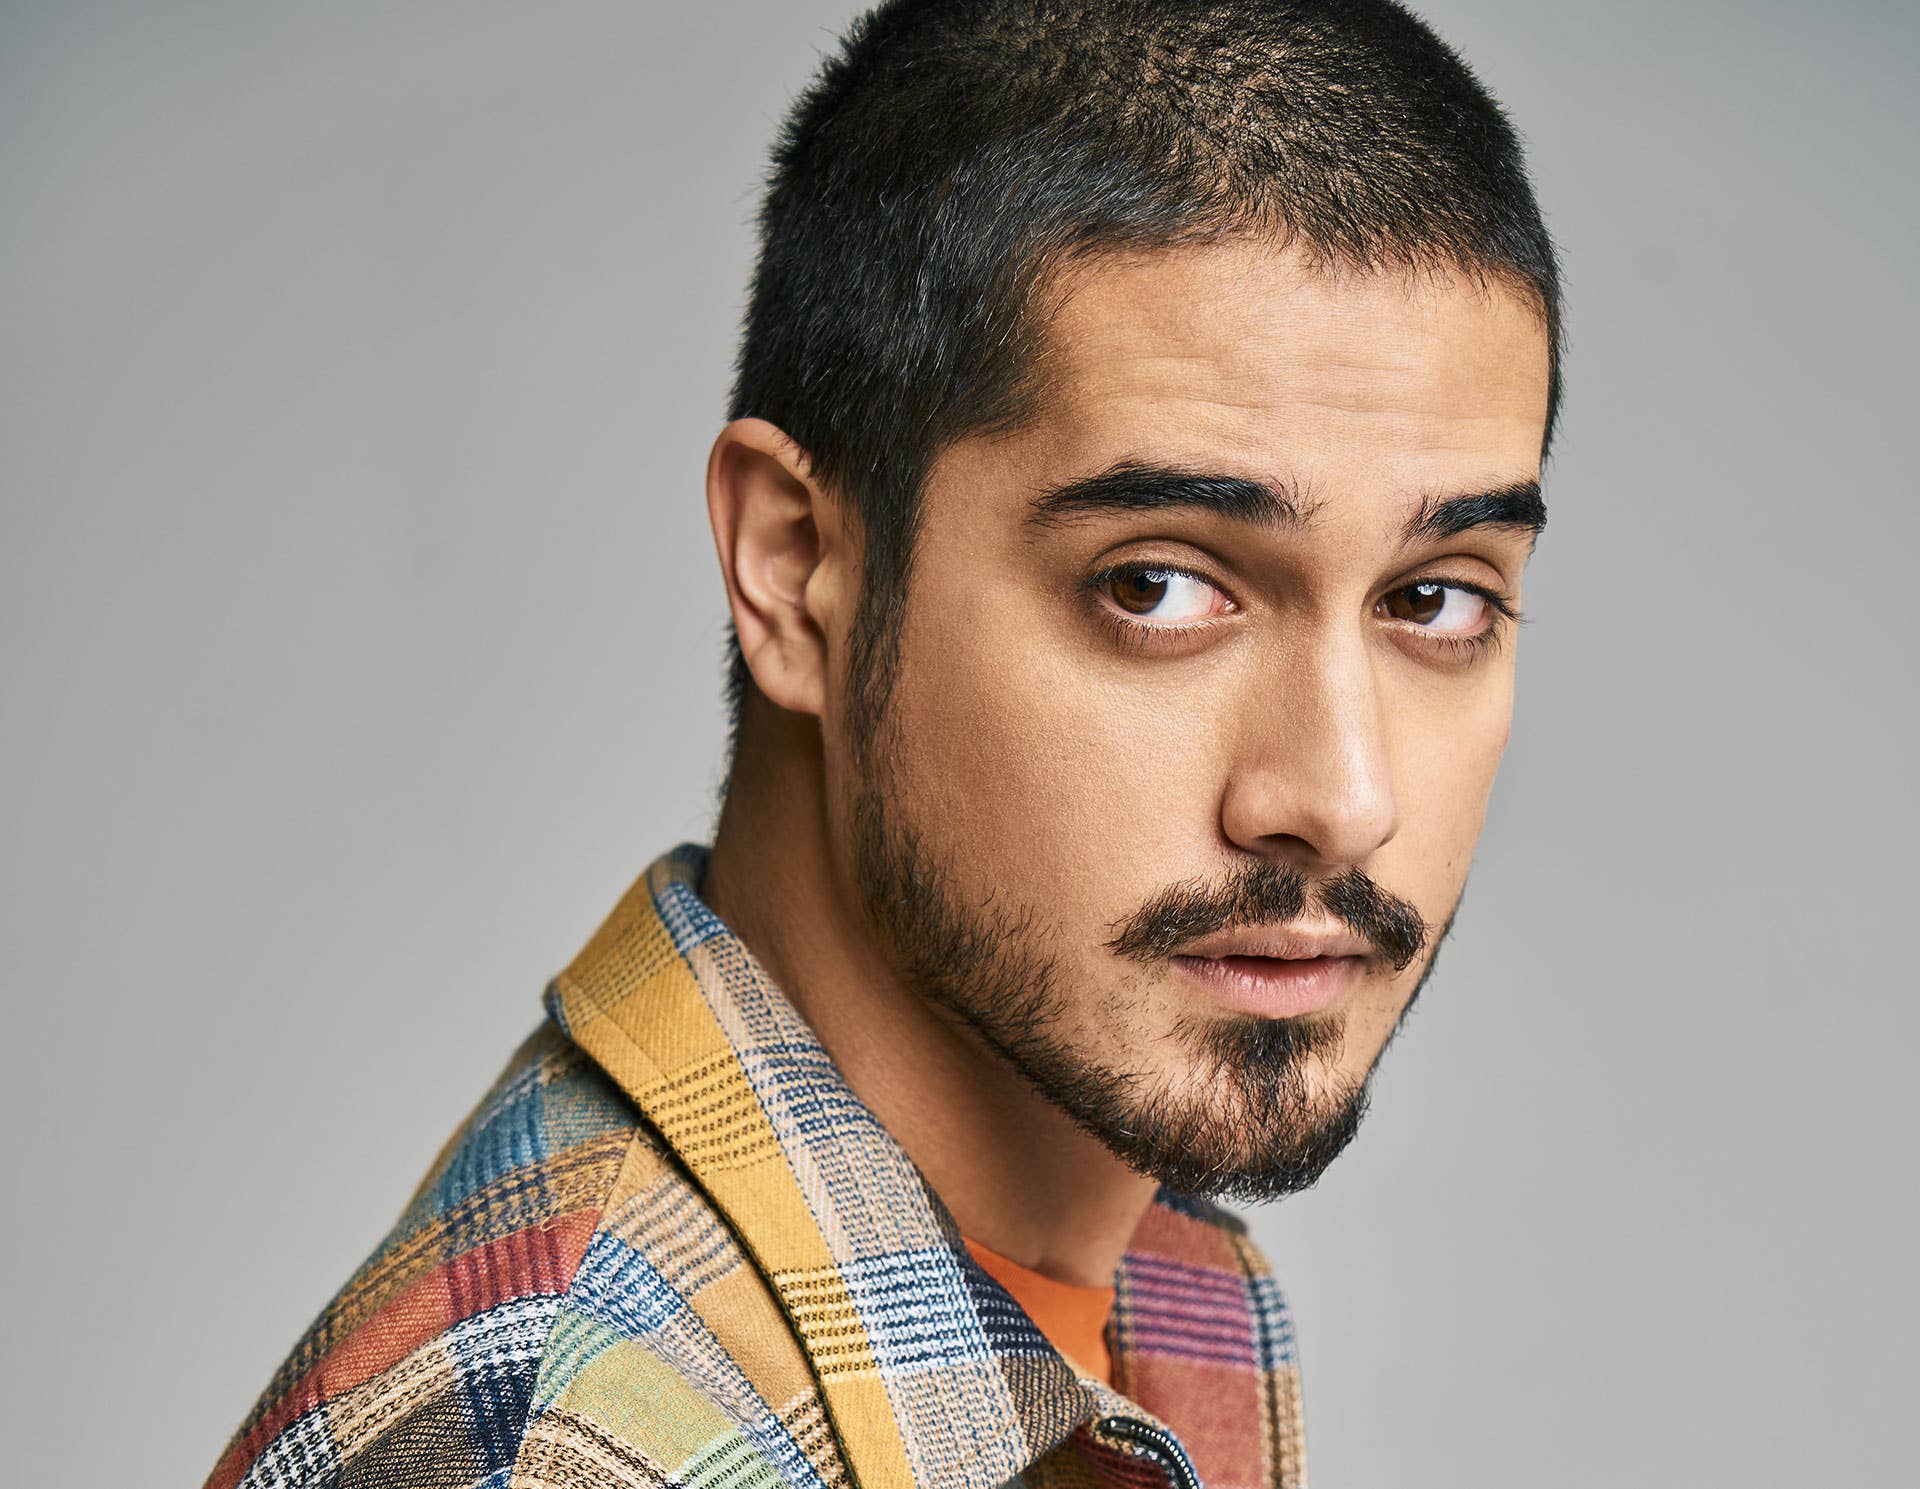 Vancouver actor Avan Jogia poses in photo